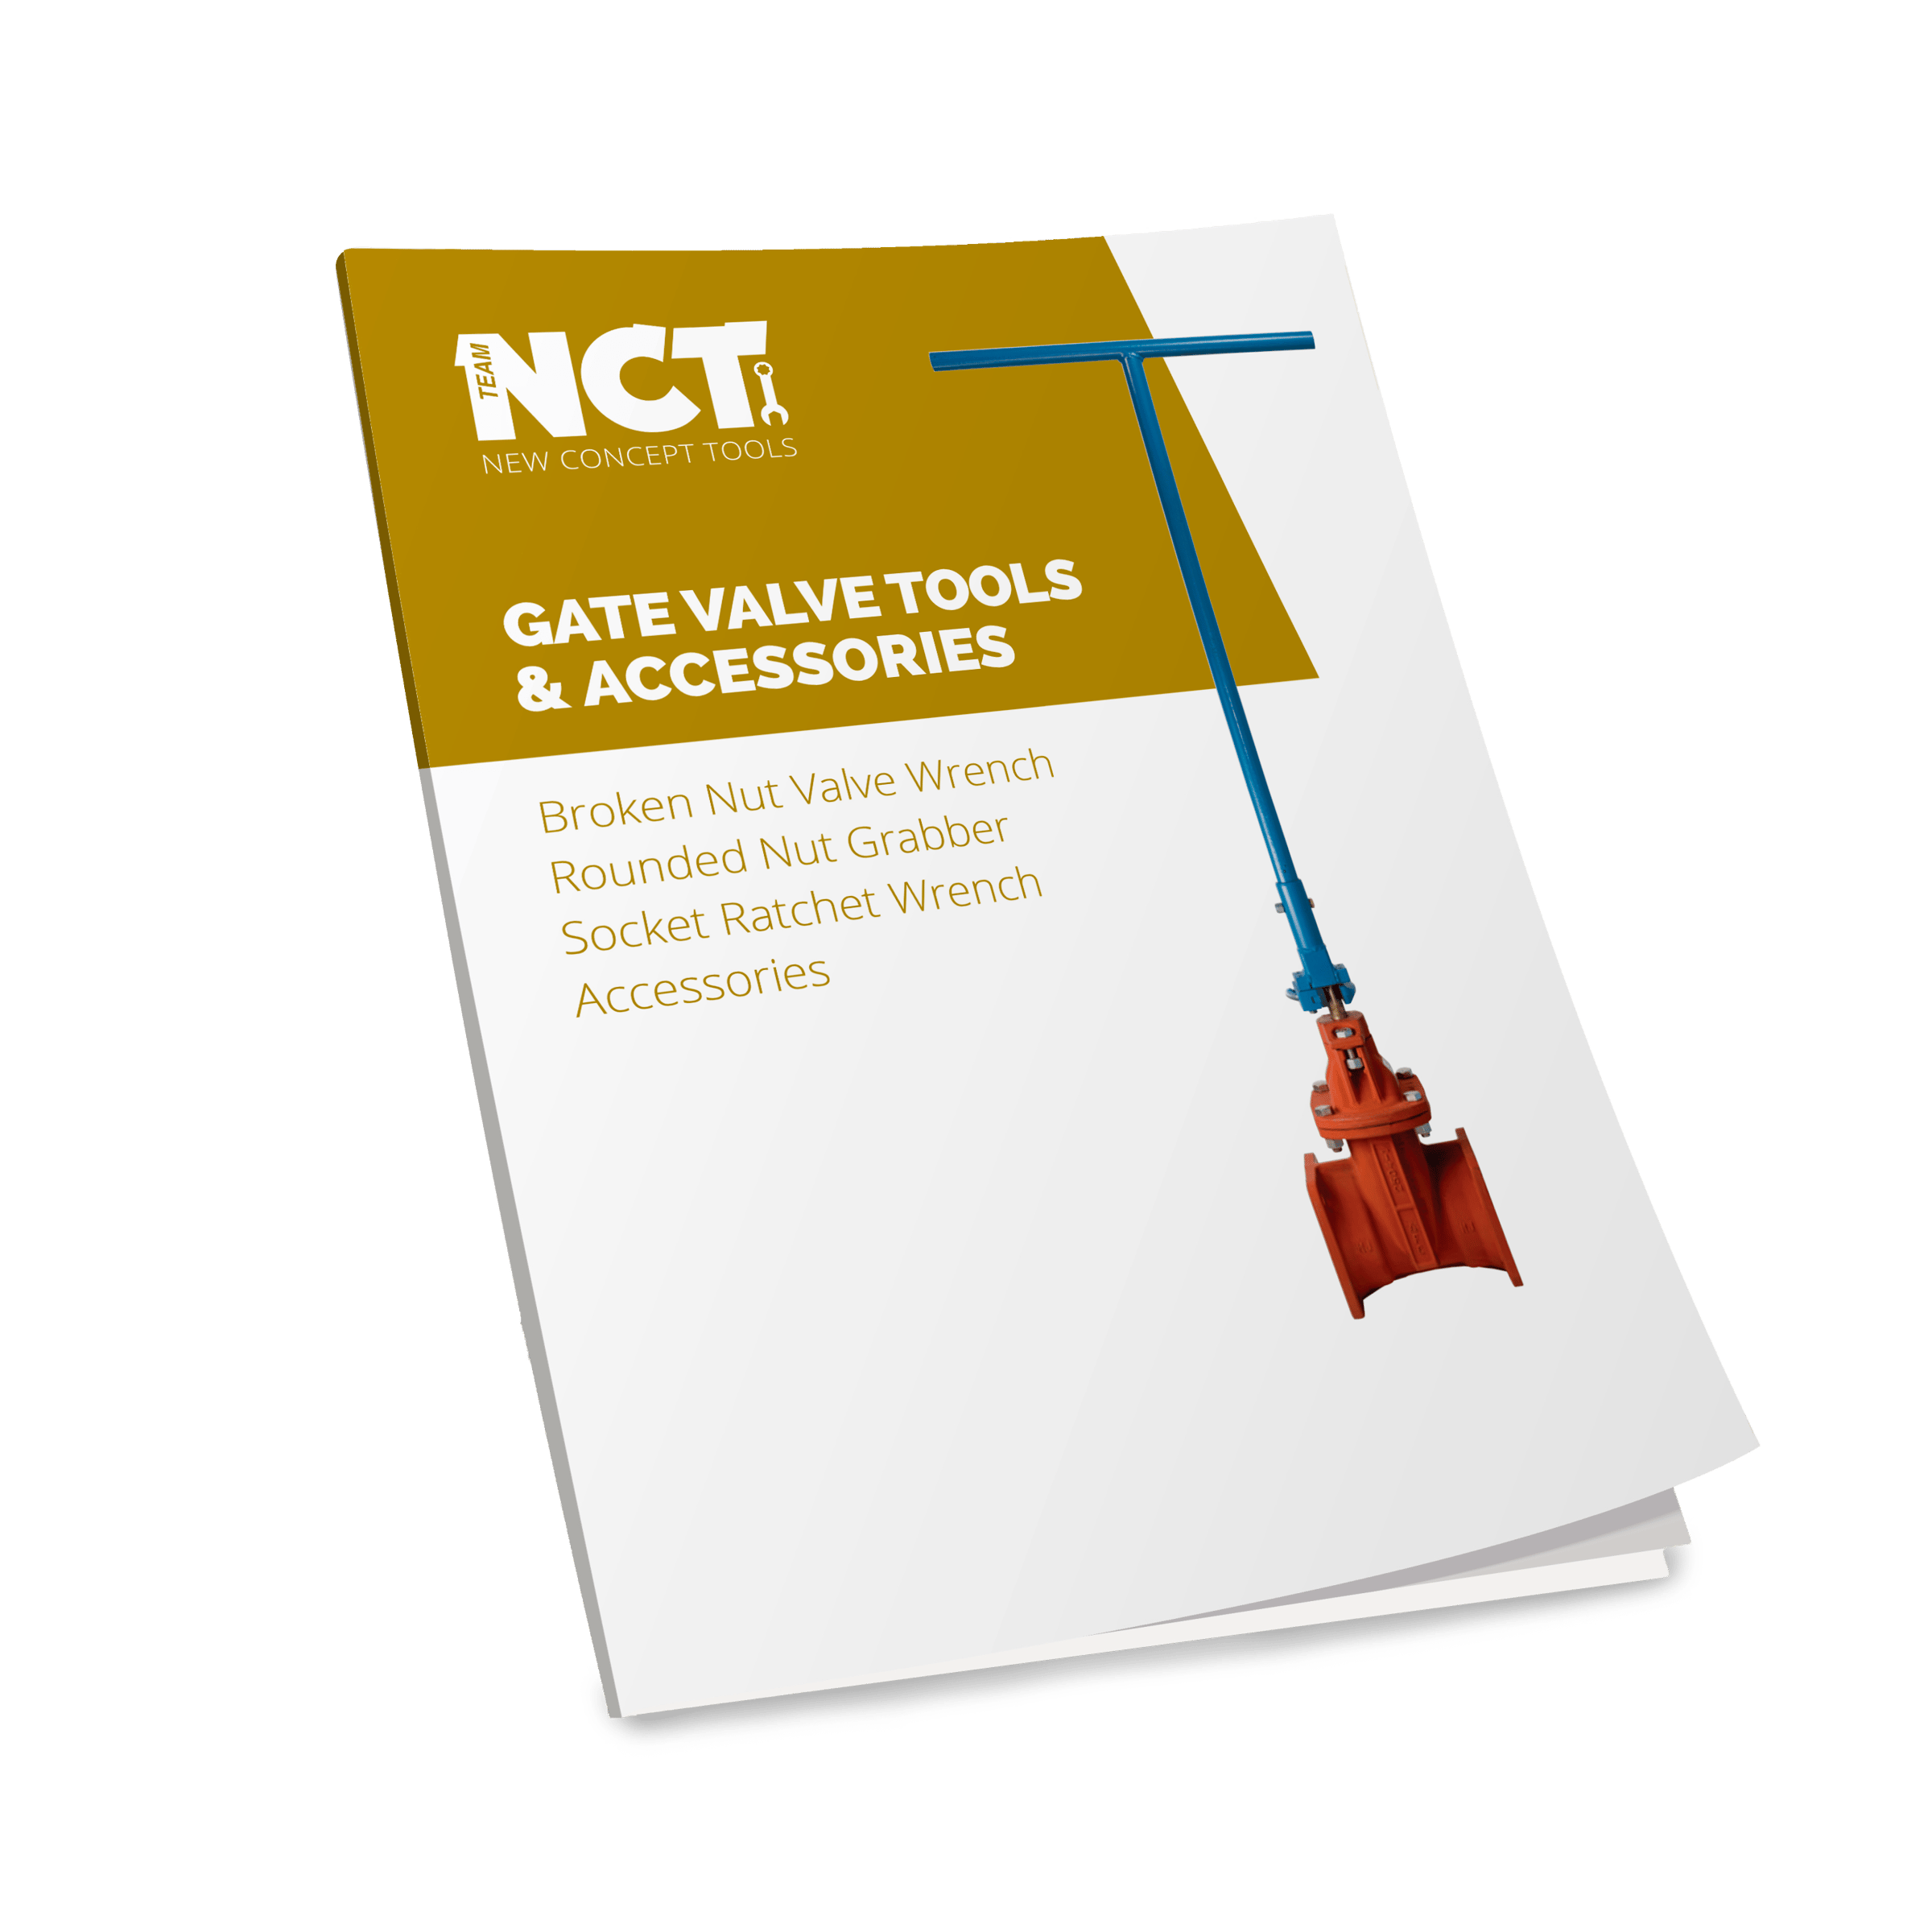 NCT Gate Valve Tools and Accessories Product Catalog Book Cover